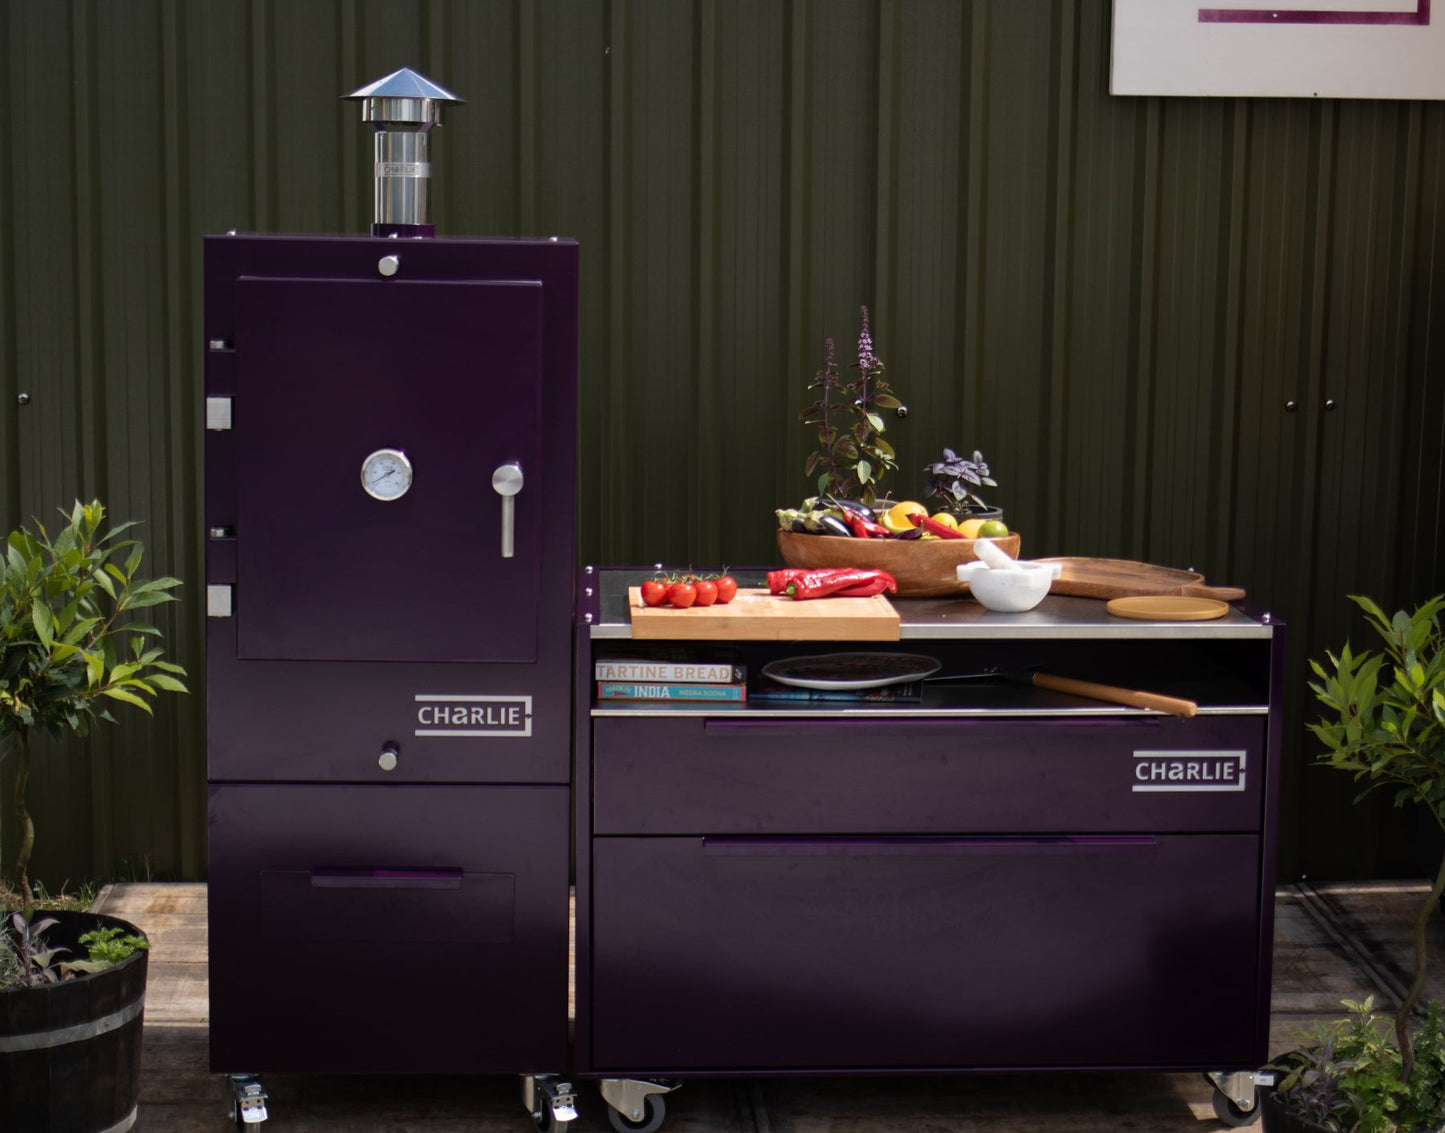 Charlie Charcoal Oven - Teal Duck